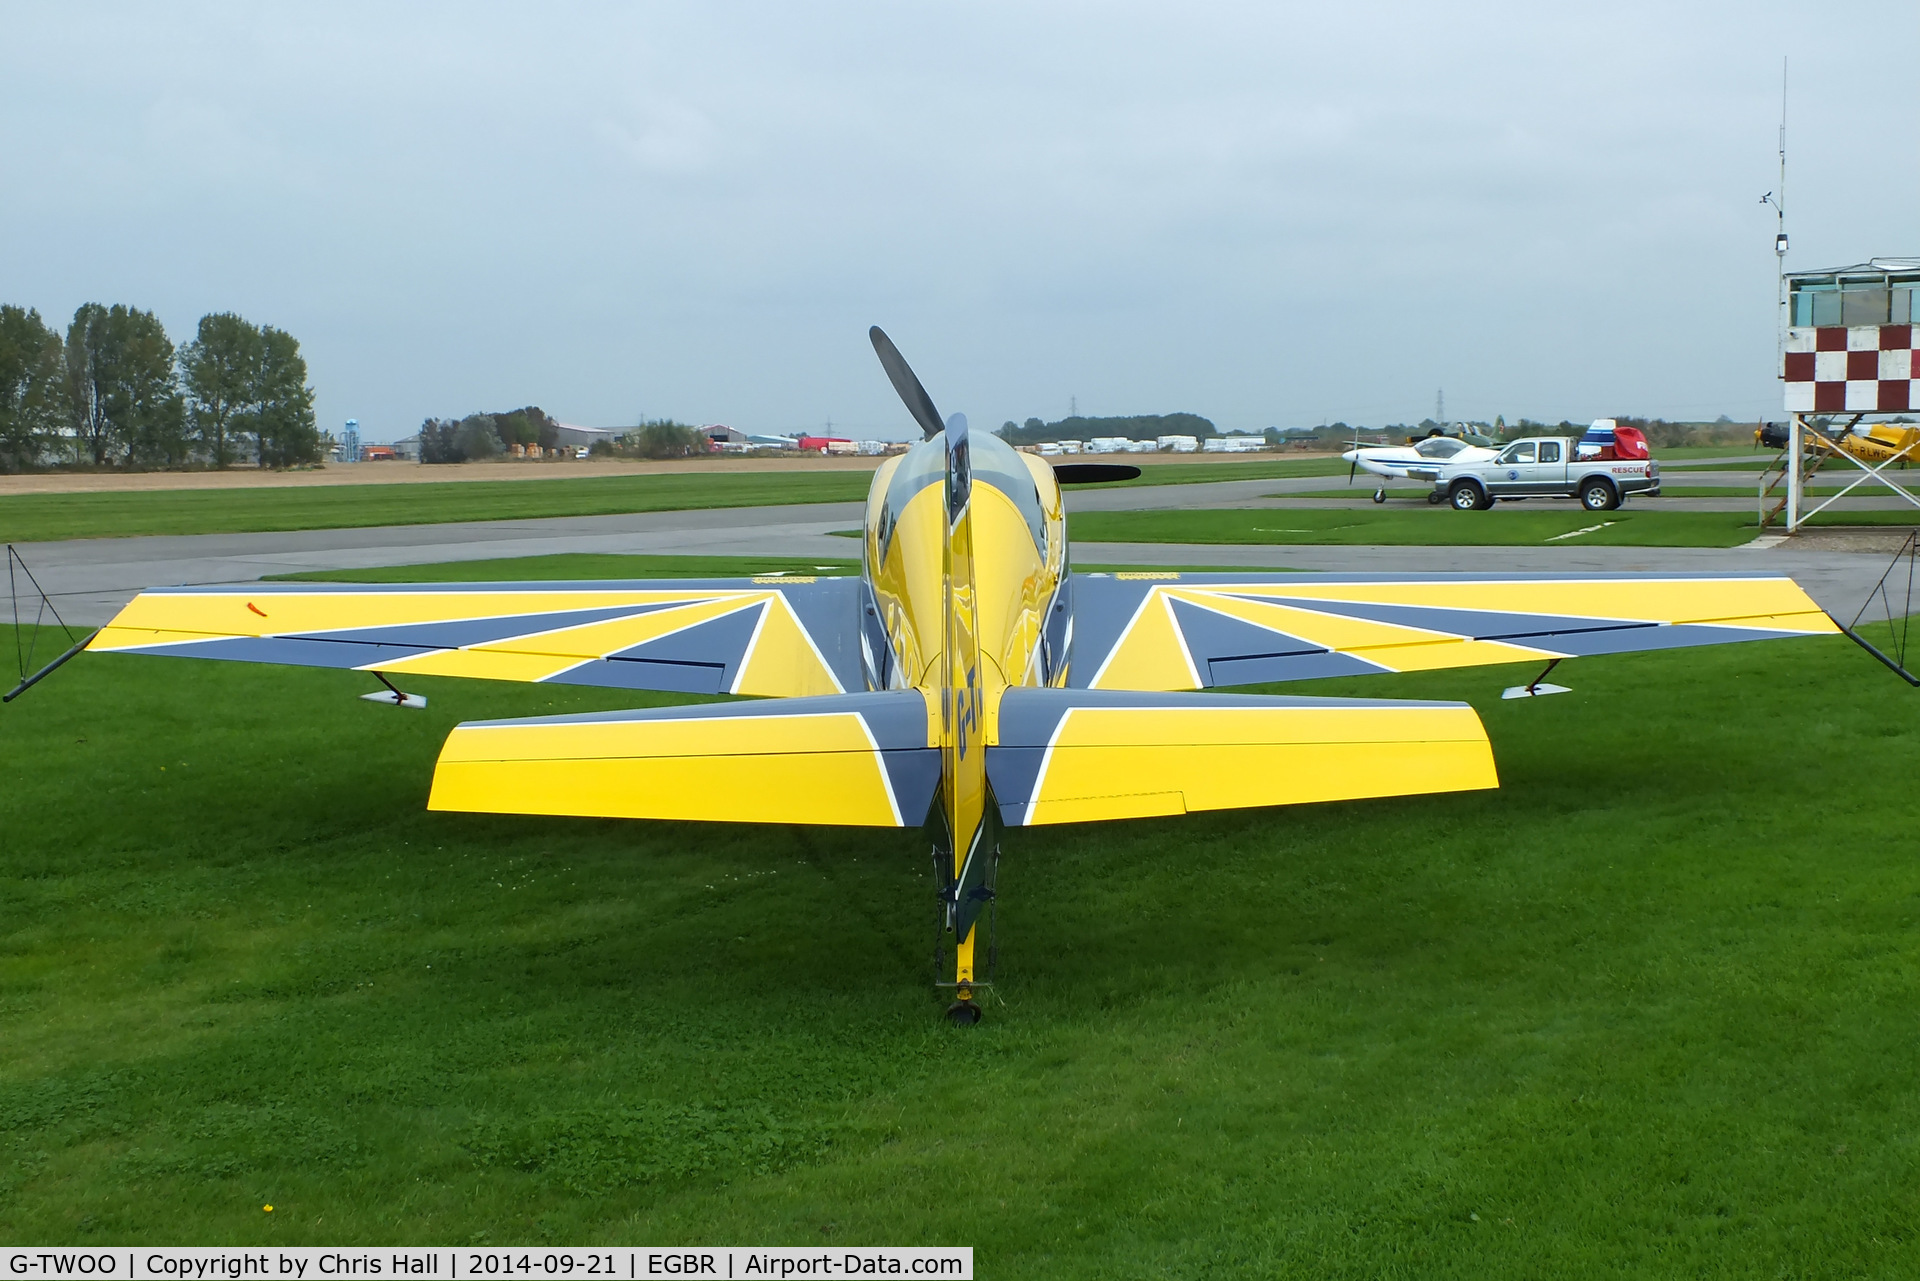 G-TWOO, 1996 Extra EA-300/200 C/N 05, at Breighton's Heli Fly-in, 2014